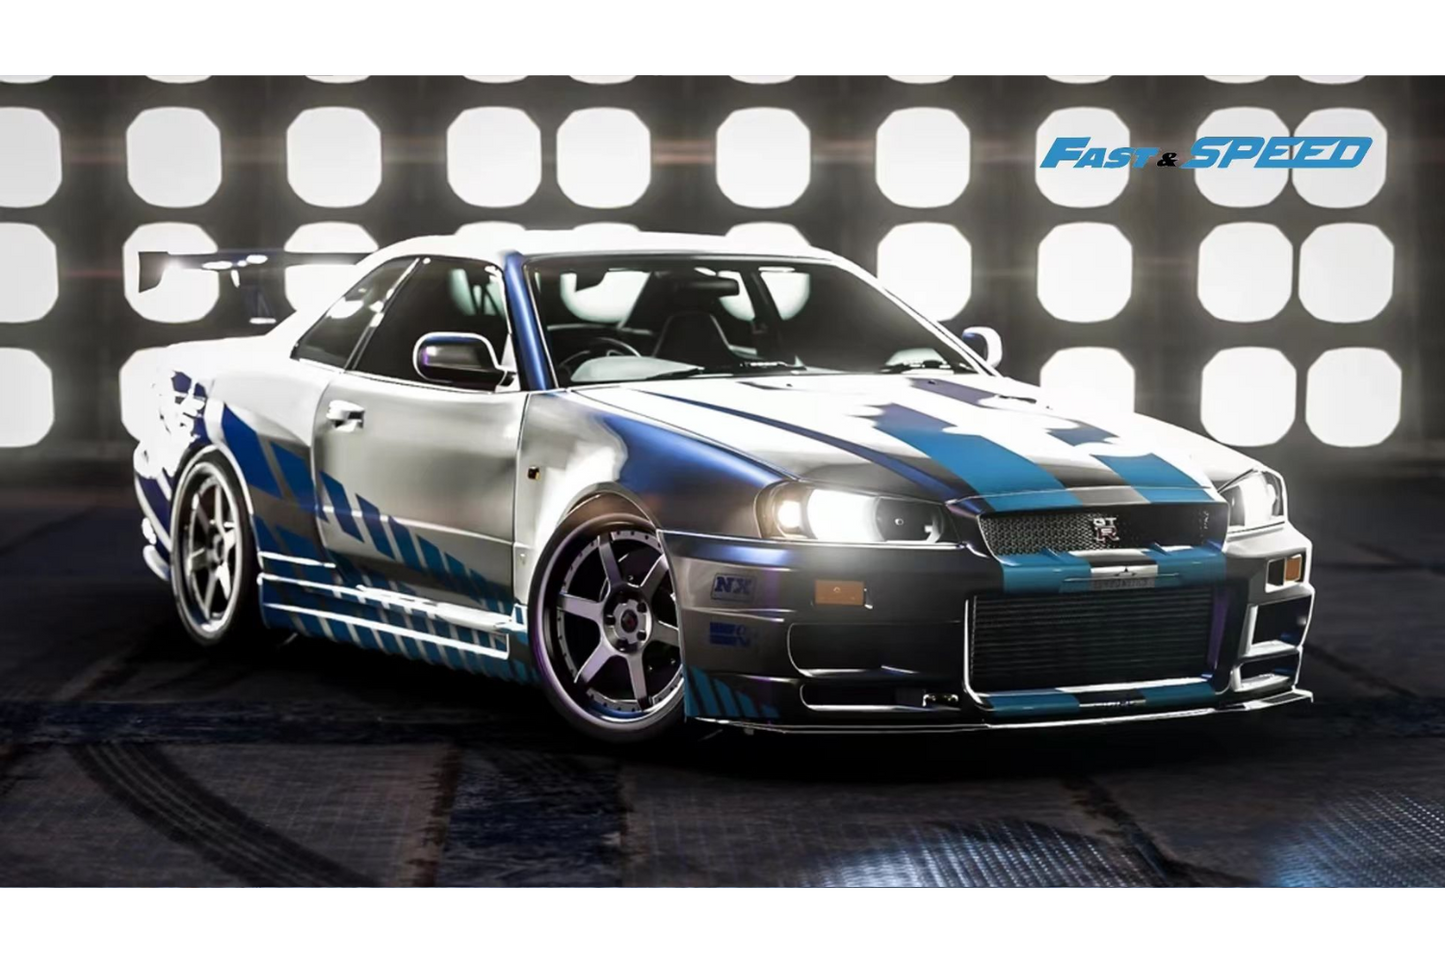 Fast Speed 1/64 Nissan Skyline GT-R (R34) Z-Tune TE37 & High Wing Edition Fast & Furious Livery